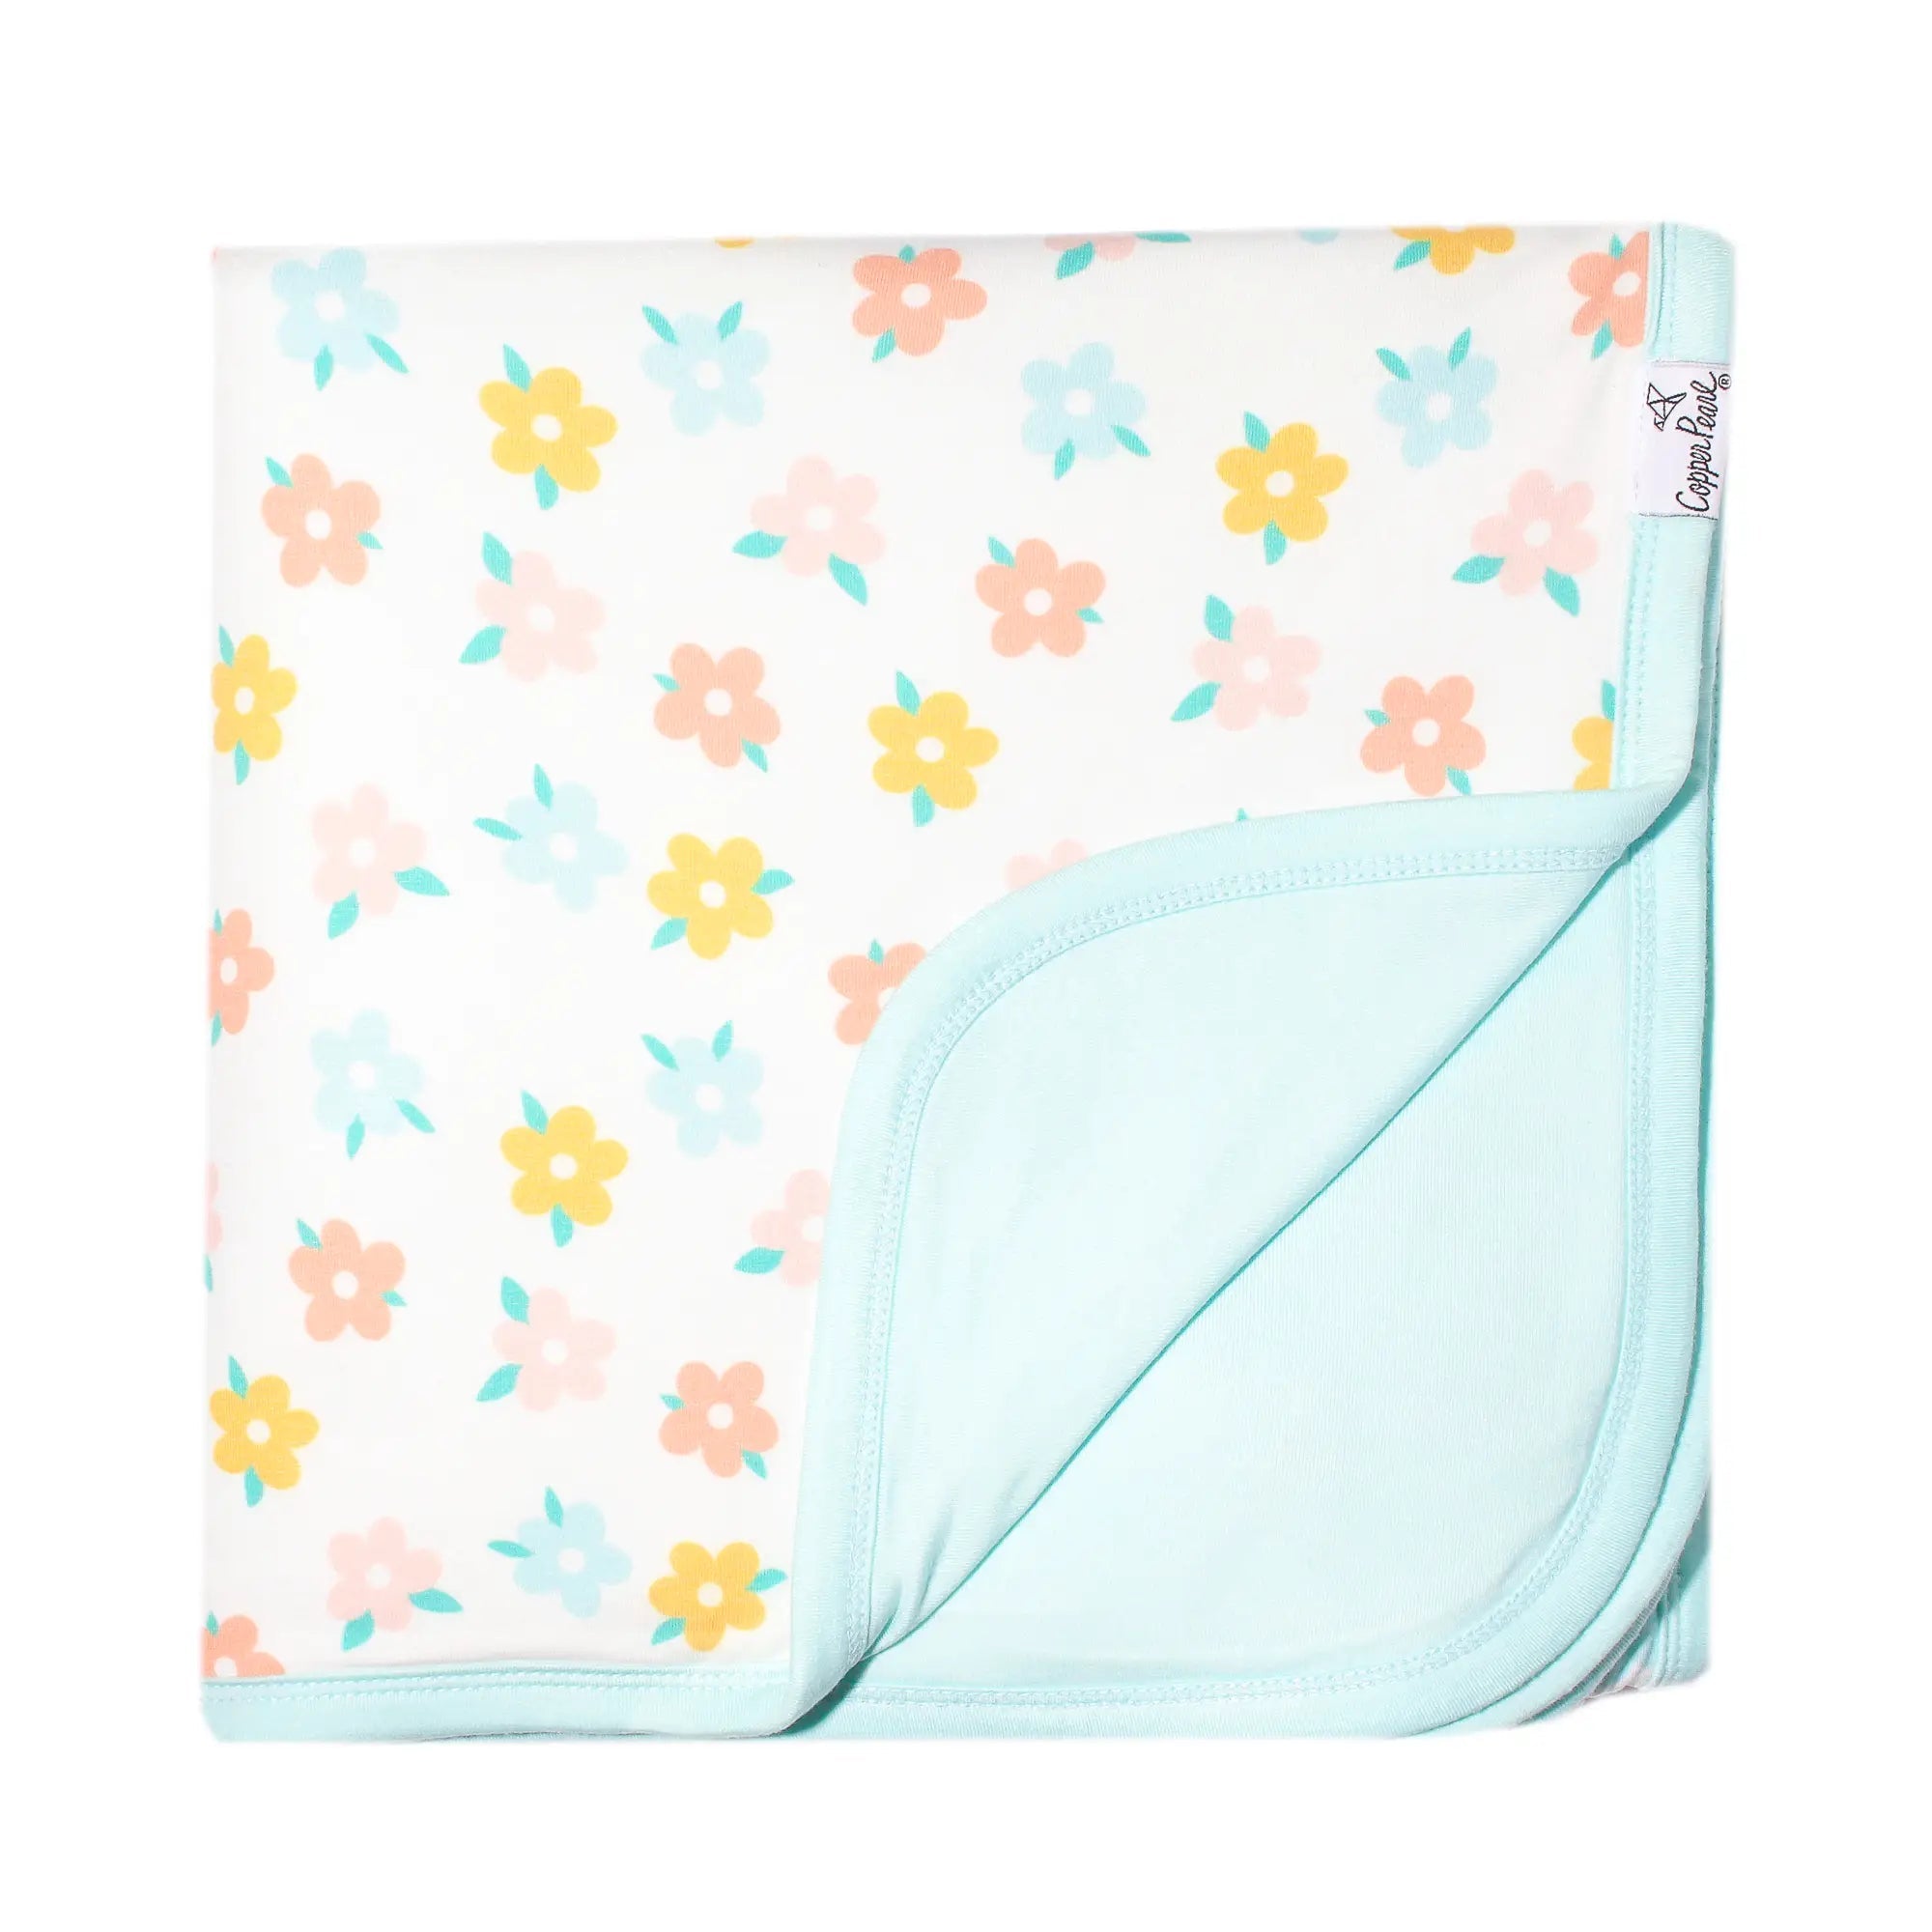 Copper Pearl Daisy 3-Layer Stretchy Quilt-COPPER PEARL-Little Giant Kidz